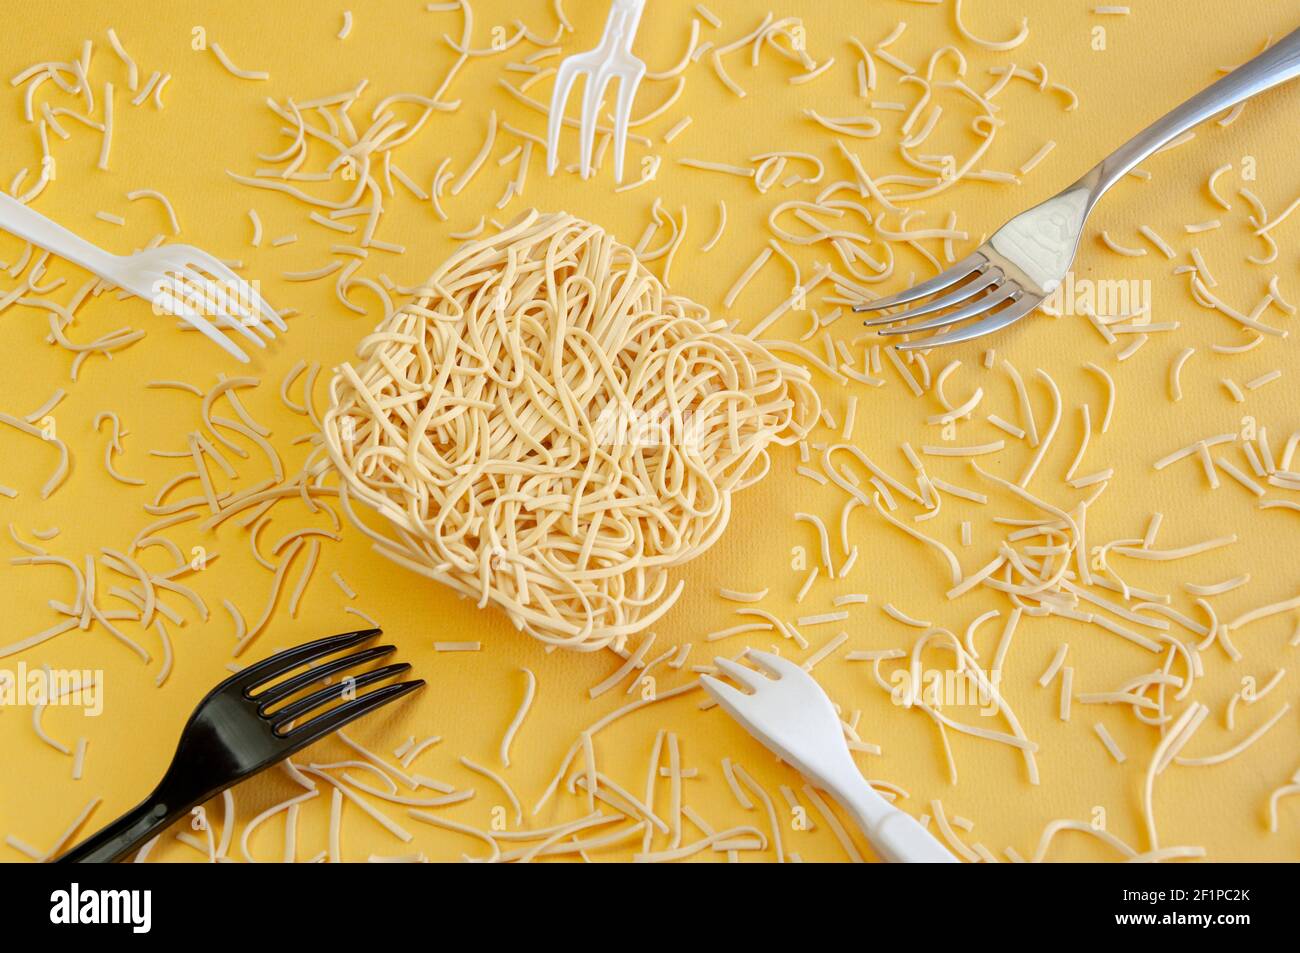 Range of disposable plastic forks around egg instant noodle scattered on yellow background. Stock Photo